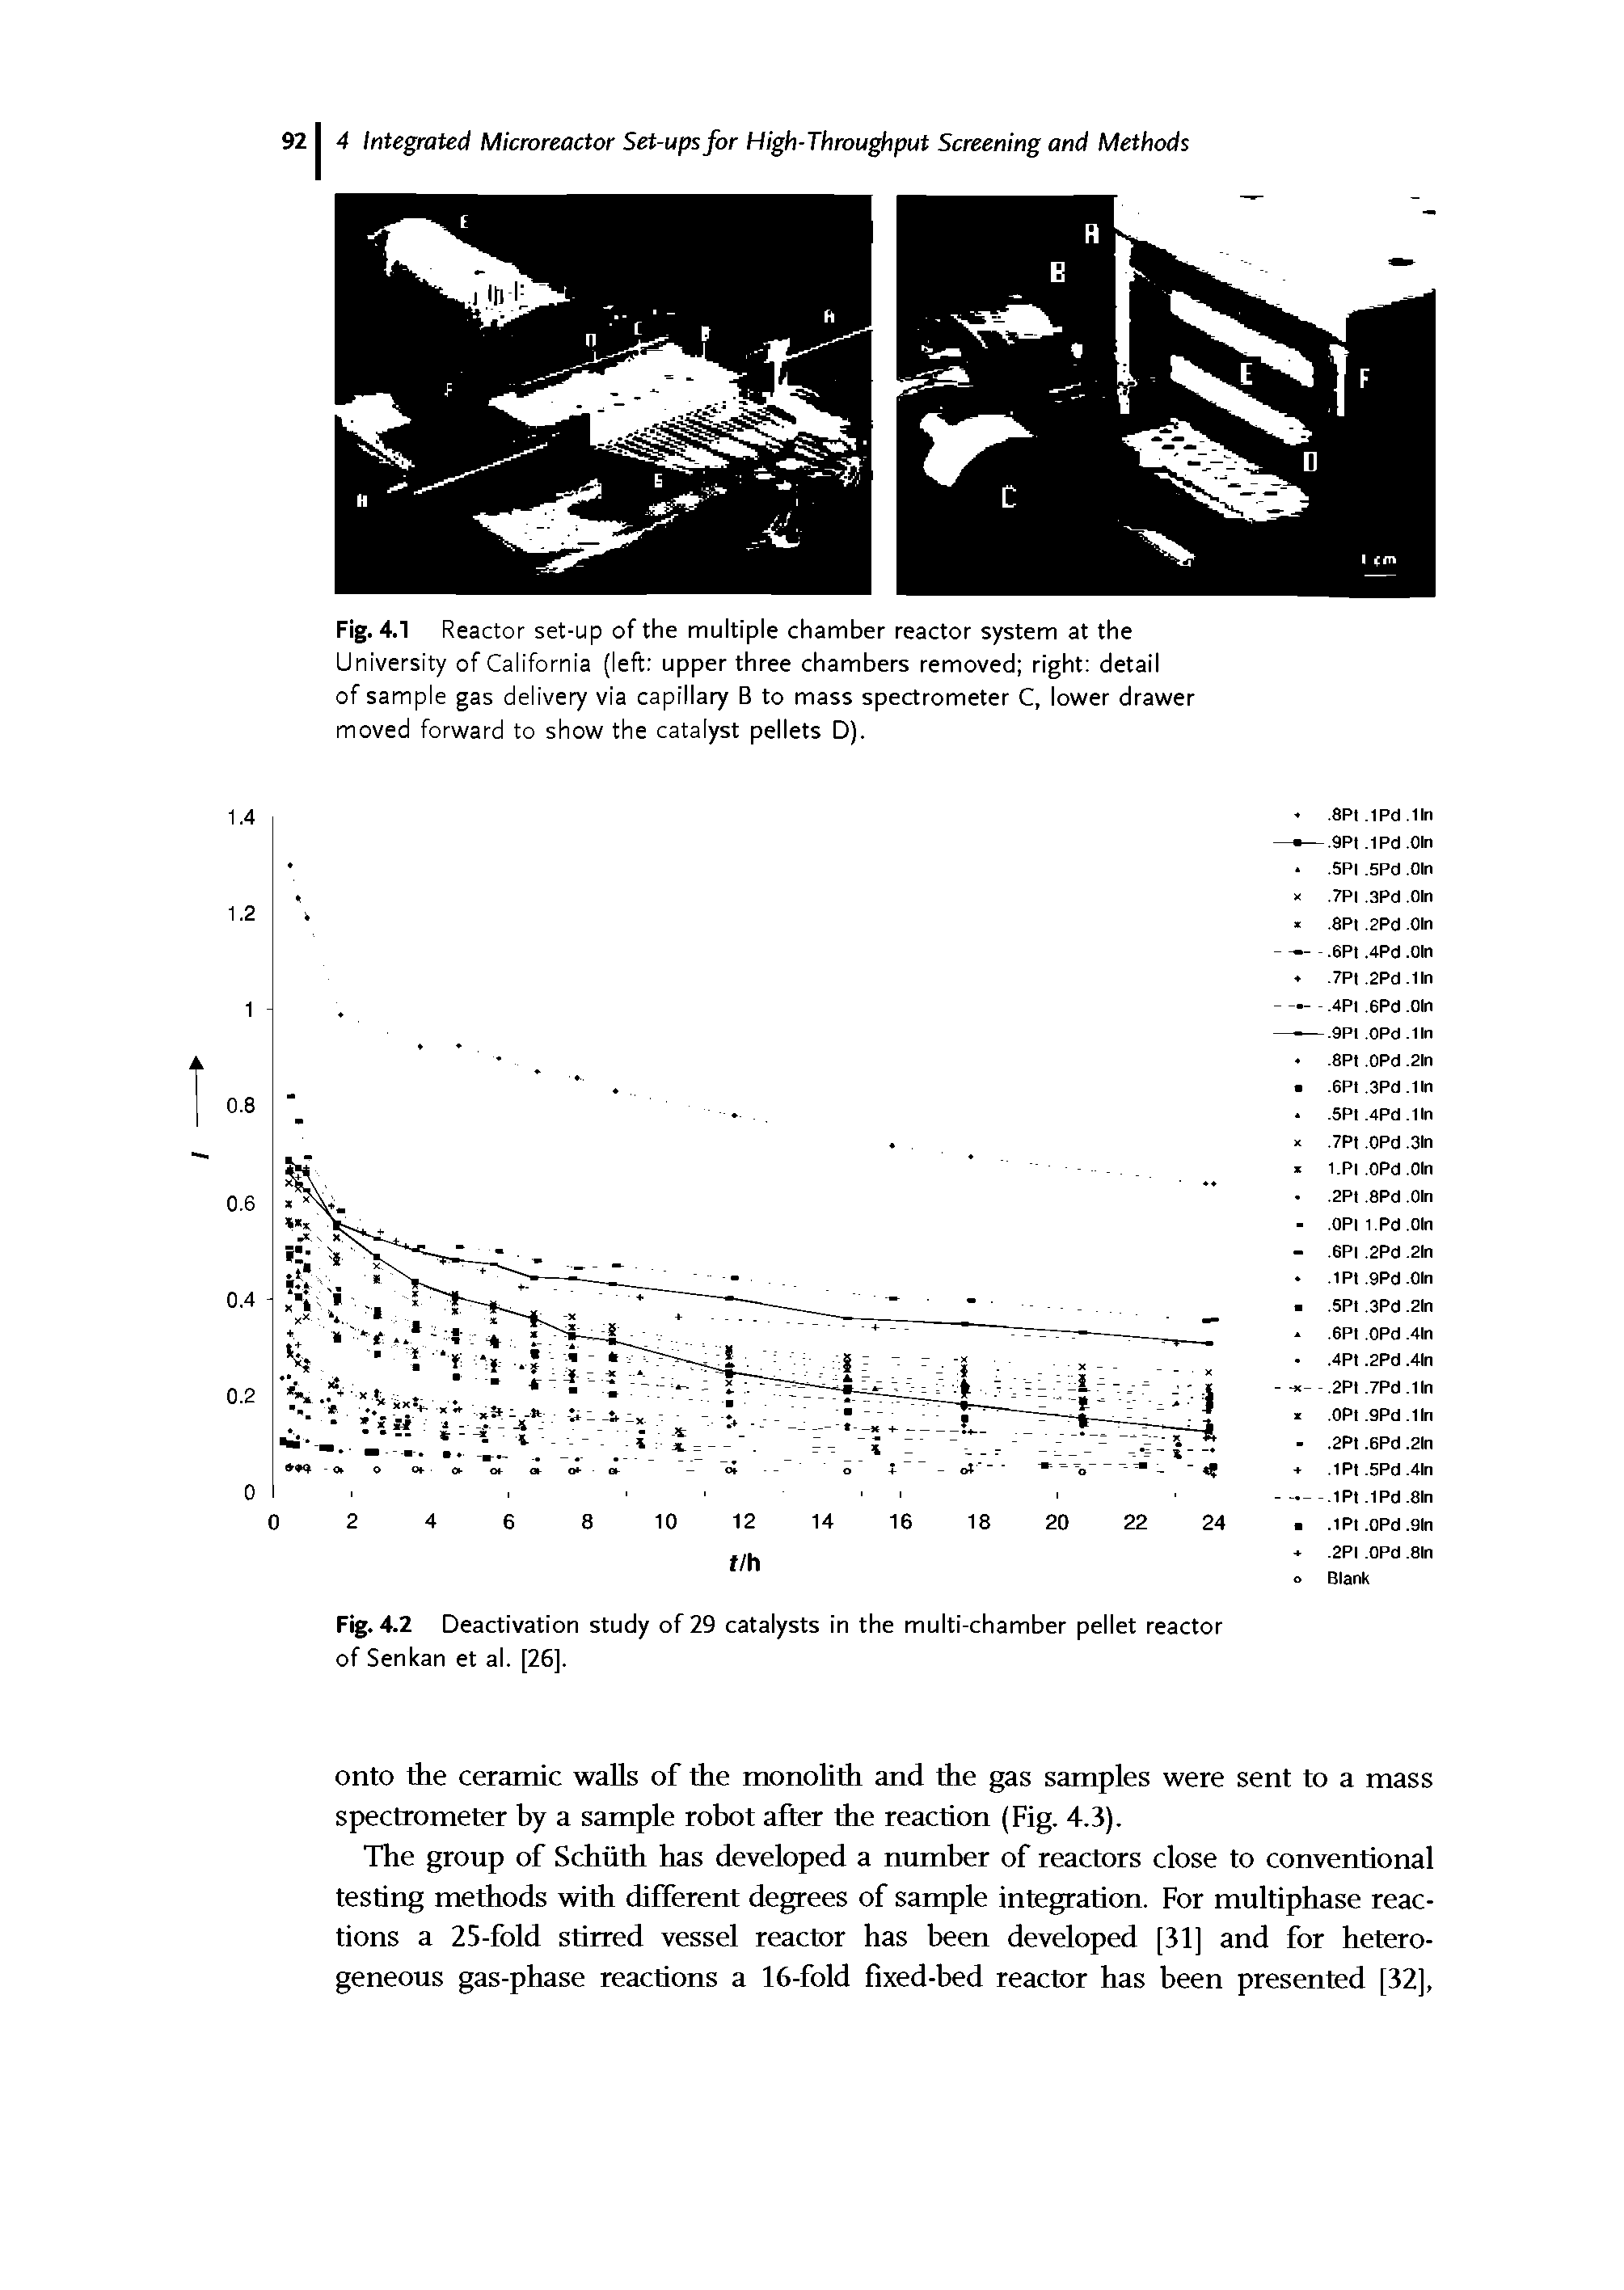 Fig. 4.1 Reactor set-up of the multiple chamber reactor system at the University of California (left upper three chambers removed right detail of sample gas delivery via capillary B to mass spectrometer C, lower drawer moved forward to show the catalyst pellets D).